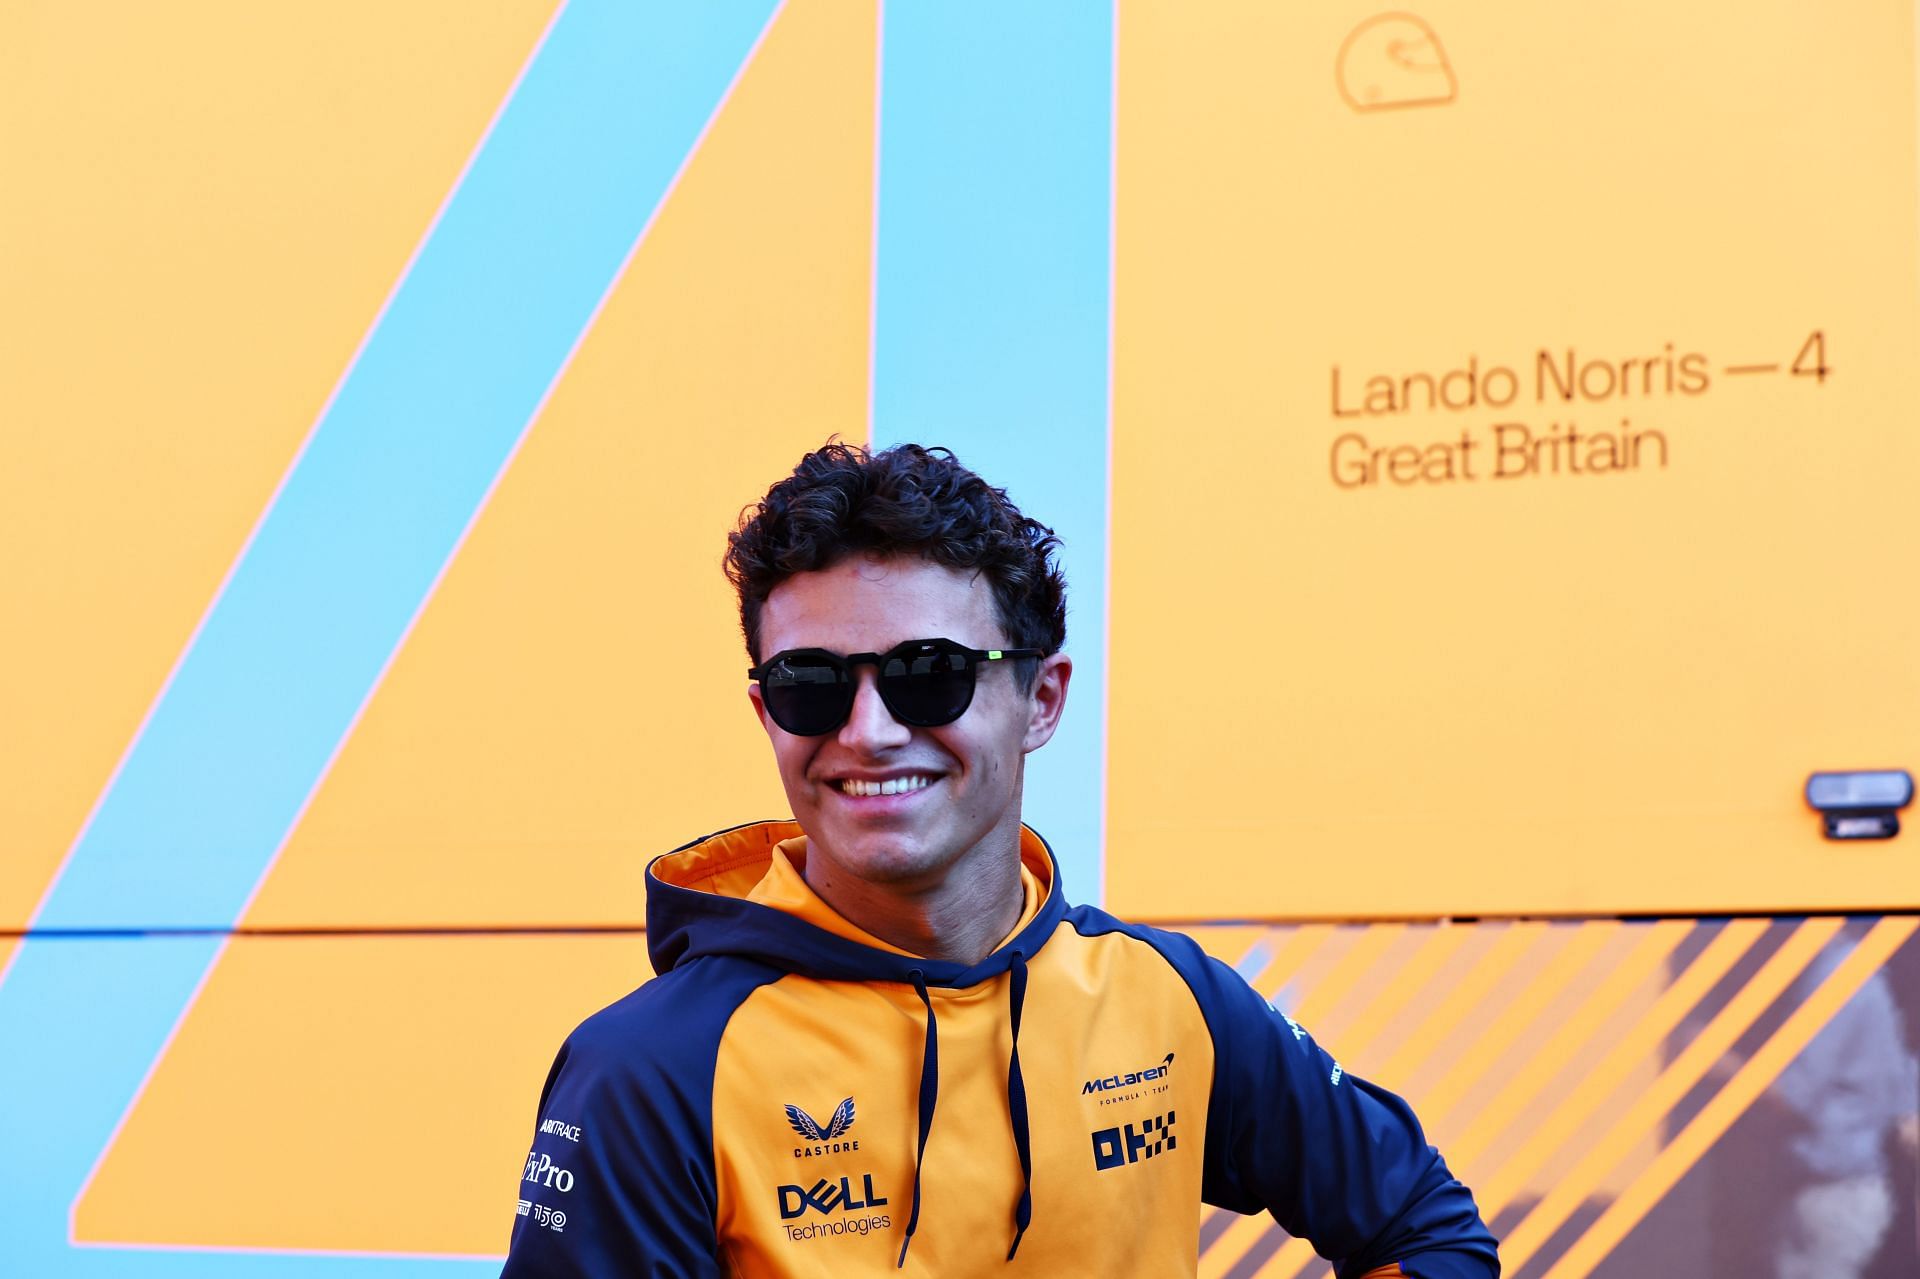 Lando Norris at the F1 Grand Prix of France - Previews